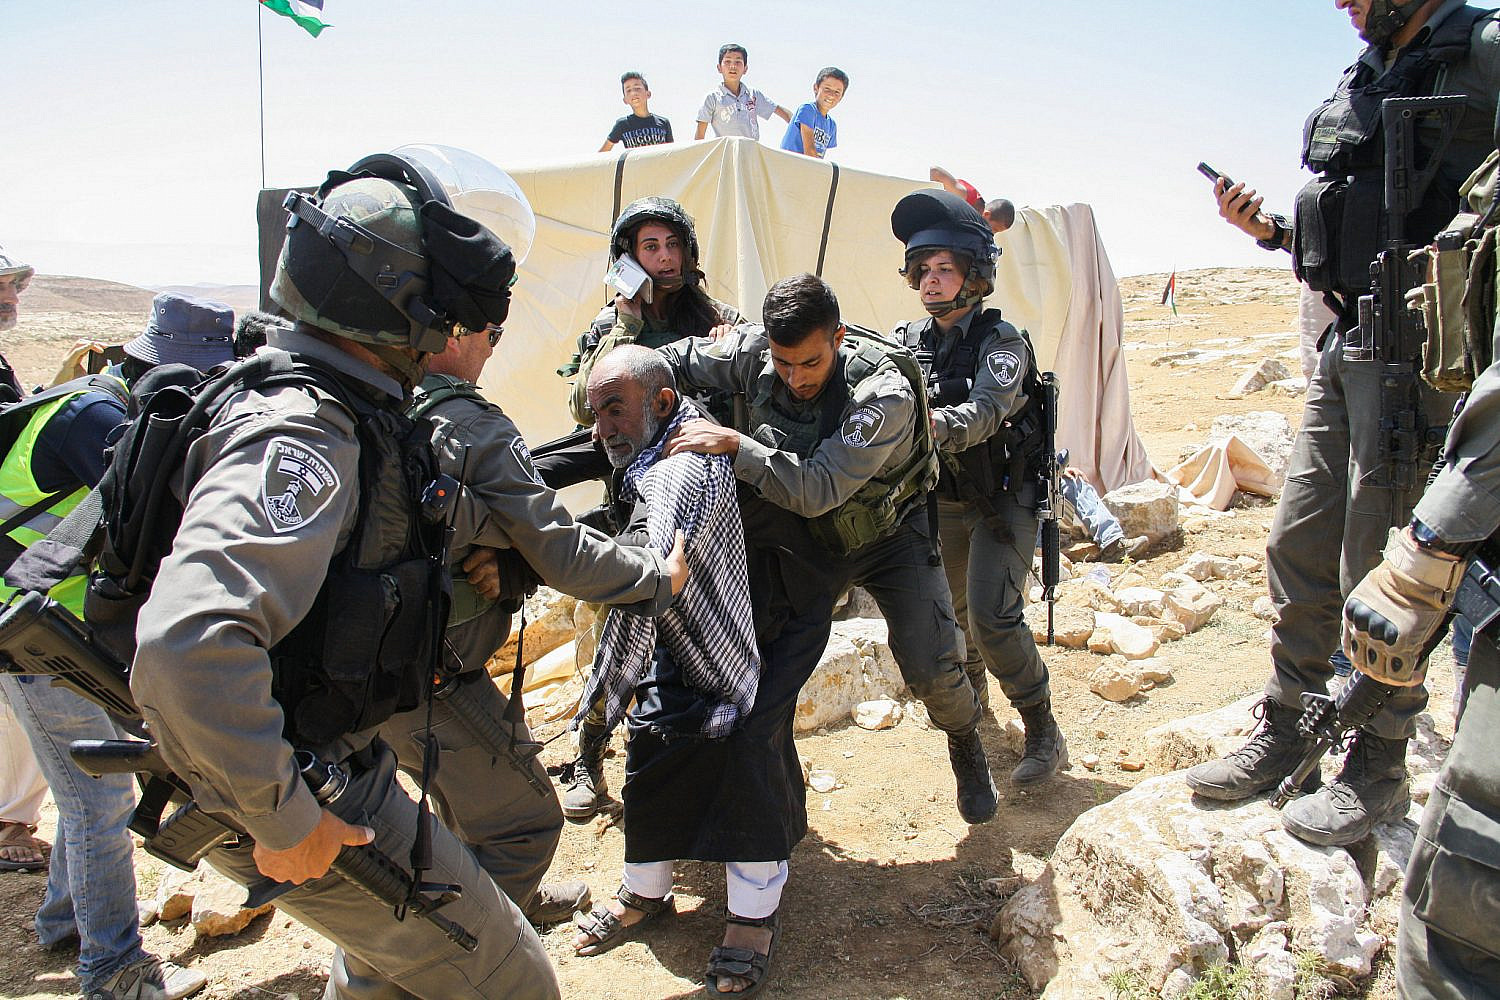 Israeli Border Police officers arrest a Palestinian Bedouin man at the Surora village near the West Bank village of Yatta, south of Hebron, May 25, 2017. (Wisam Hashlamoun/Flash90)